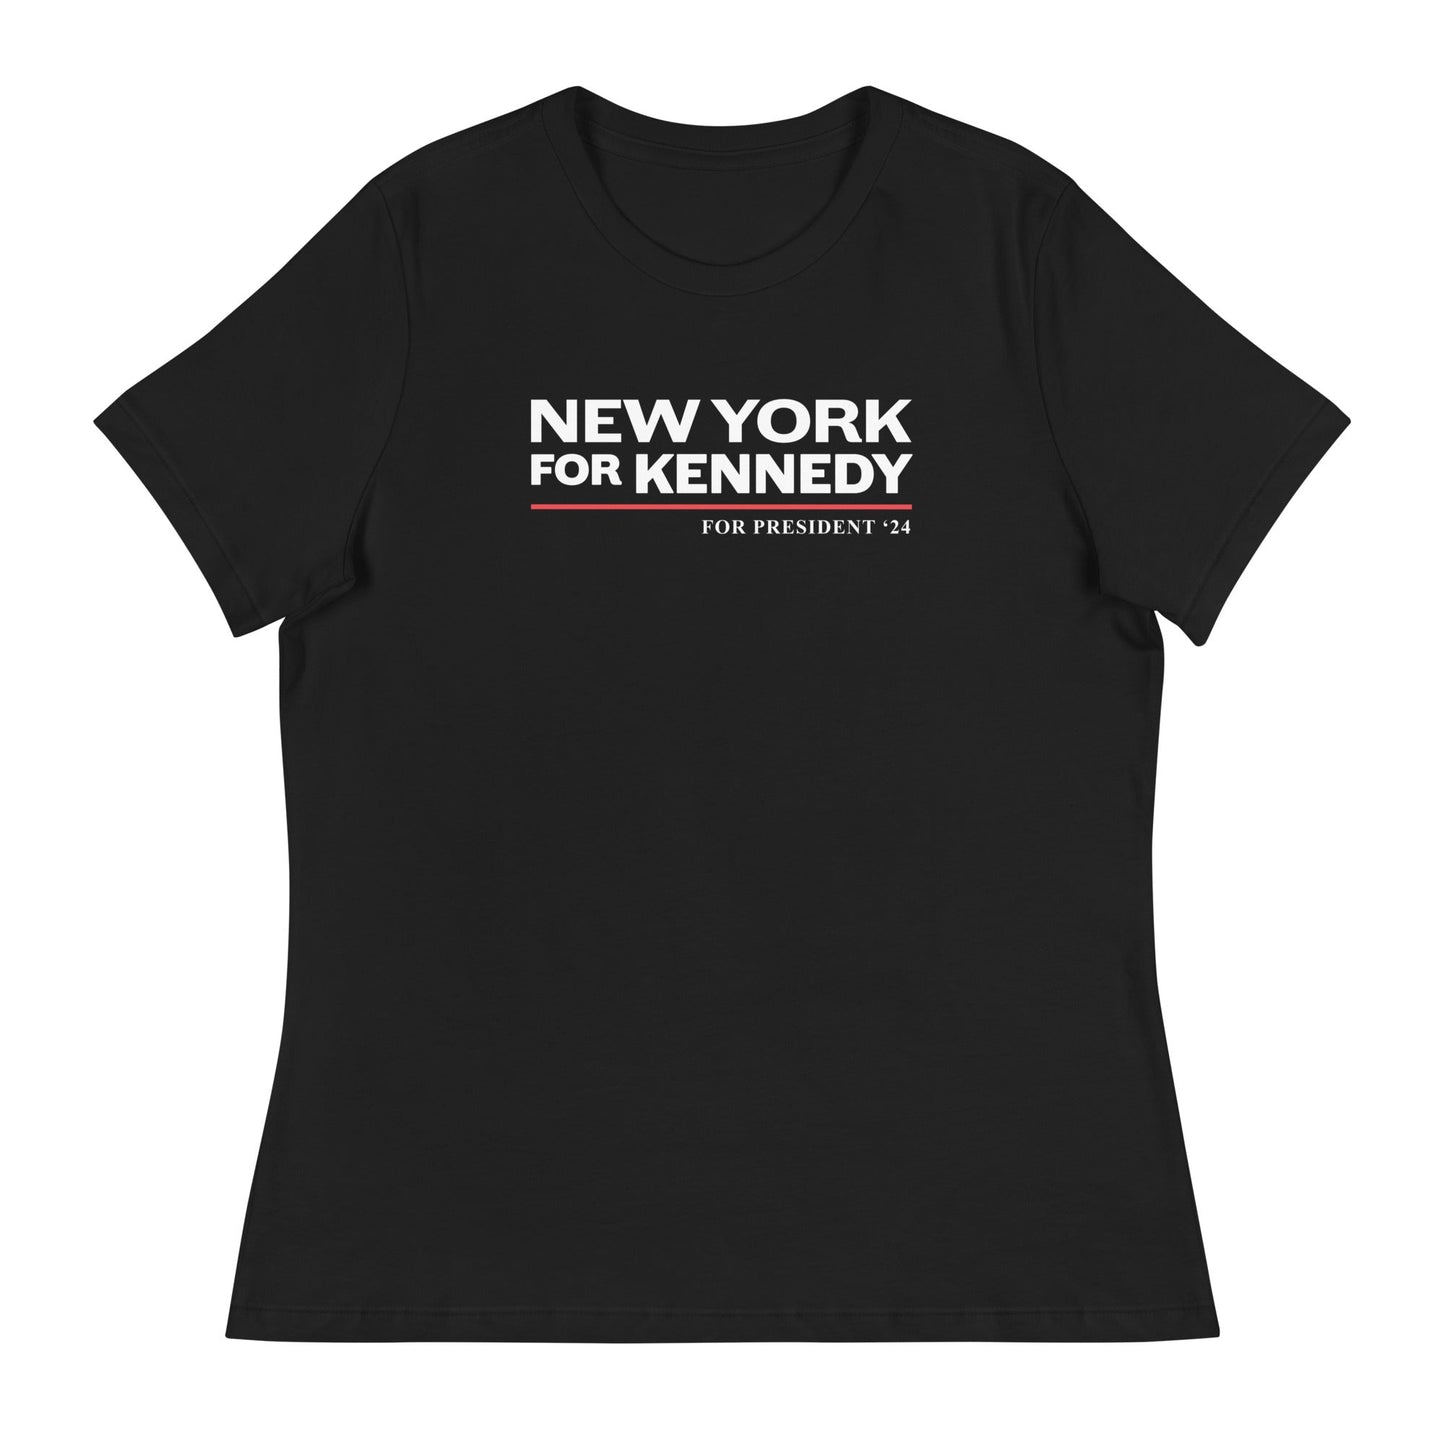 New York for Kennedy Women's Relaxed Tee - TEAM KENNEDY. All rights reserved